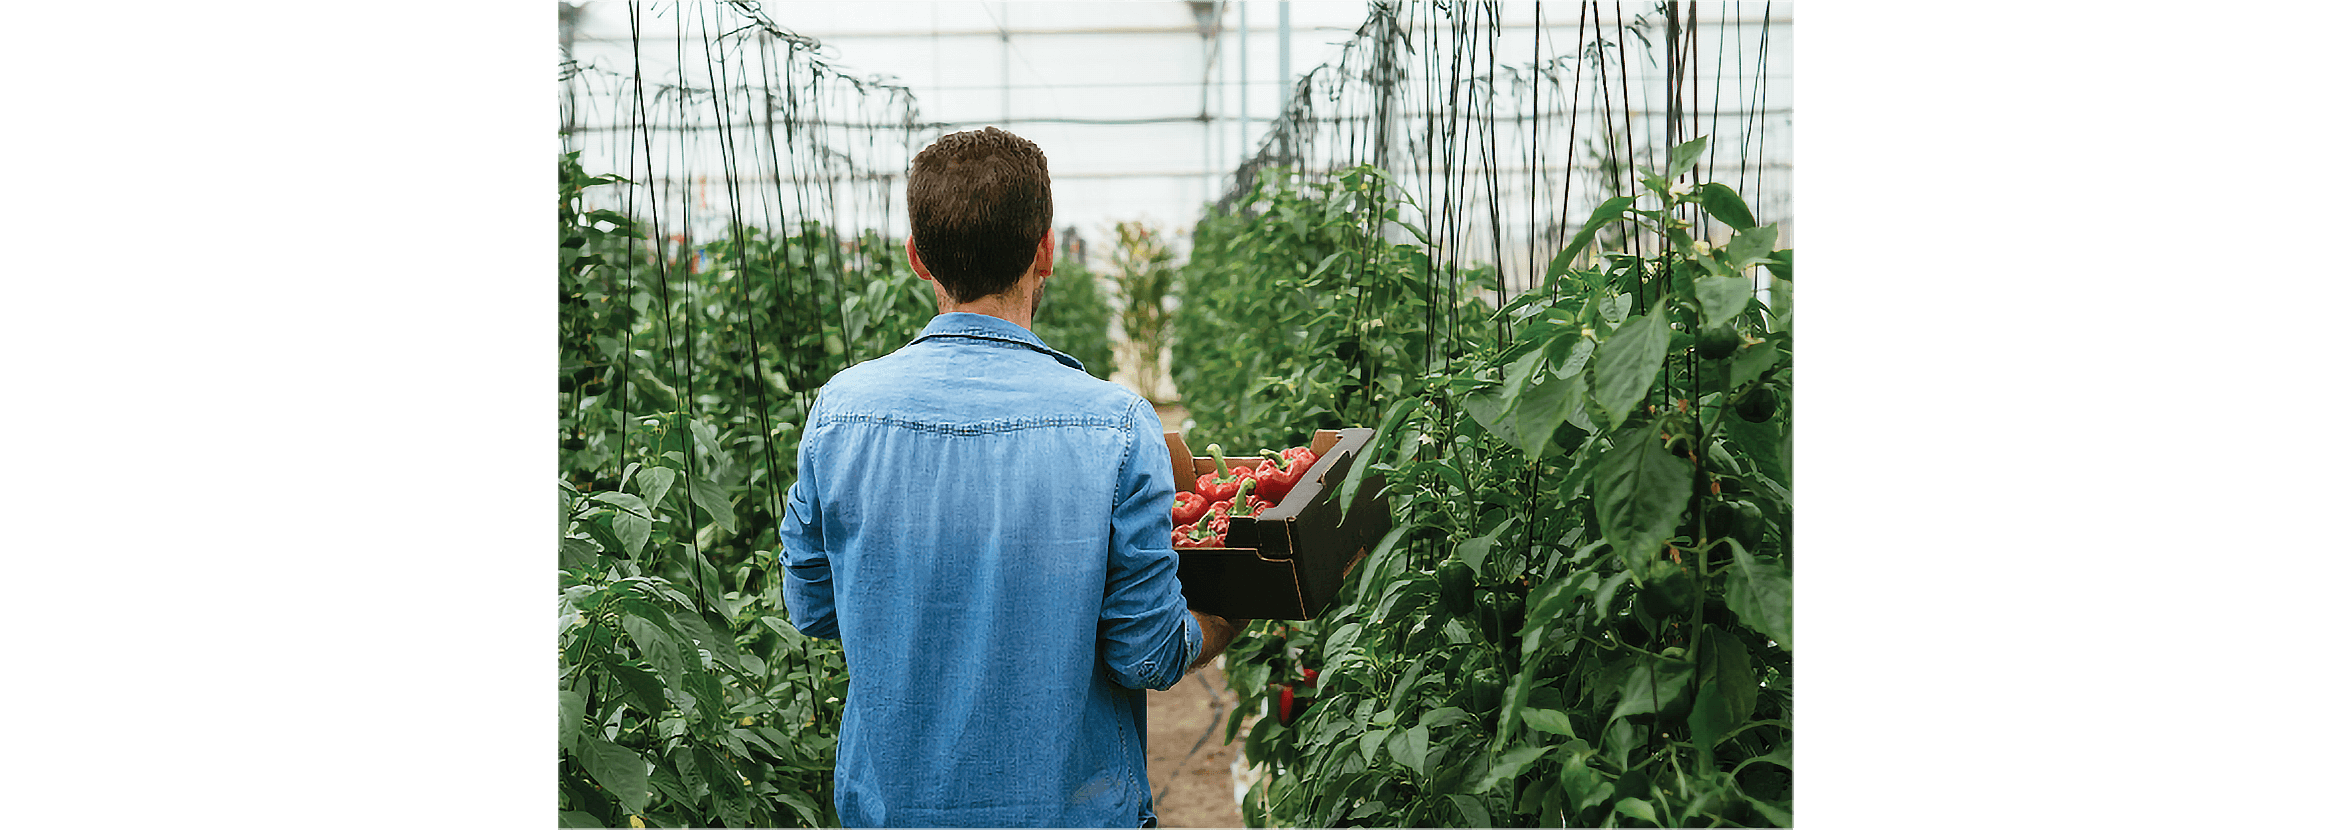 An organic vegetable grower walks along a row of tomato plants carrying a tray of tomatoes.